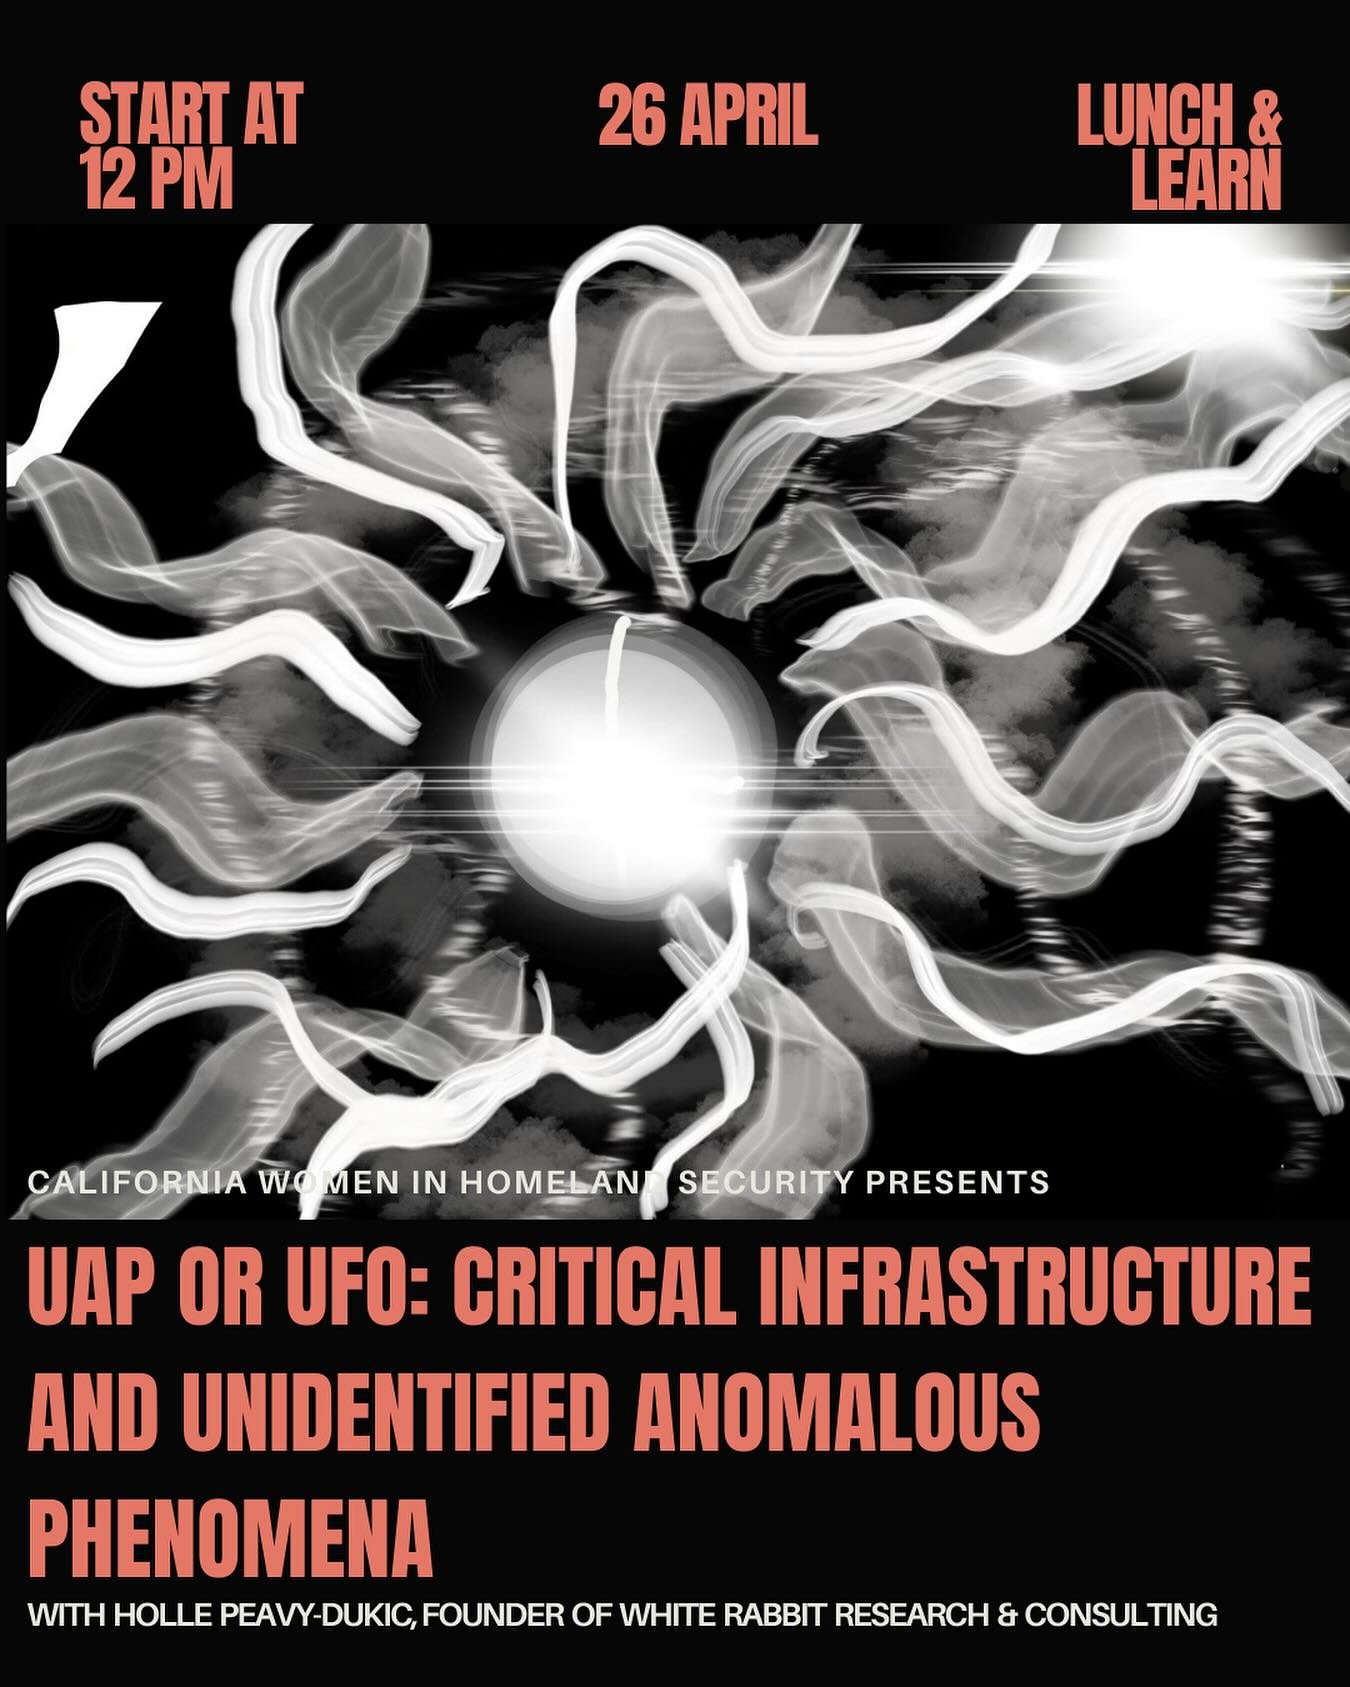 🛸 Dive into the world of Unidentified Anomalous Phenomena (UAP) with retired FBI agent Holle Peavy-Dukic, founder of White Rabbit Research &amp; Consulting.

Gain insights into:
-The nature of UAP
-Their connection to critical infrastructure
-Implic